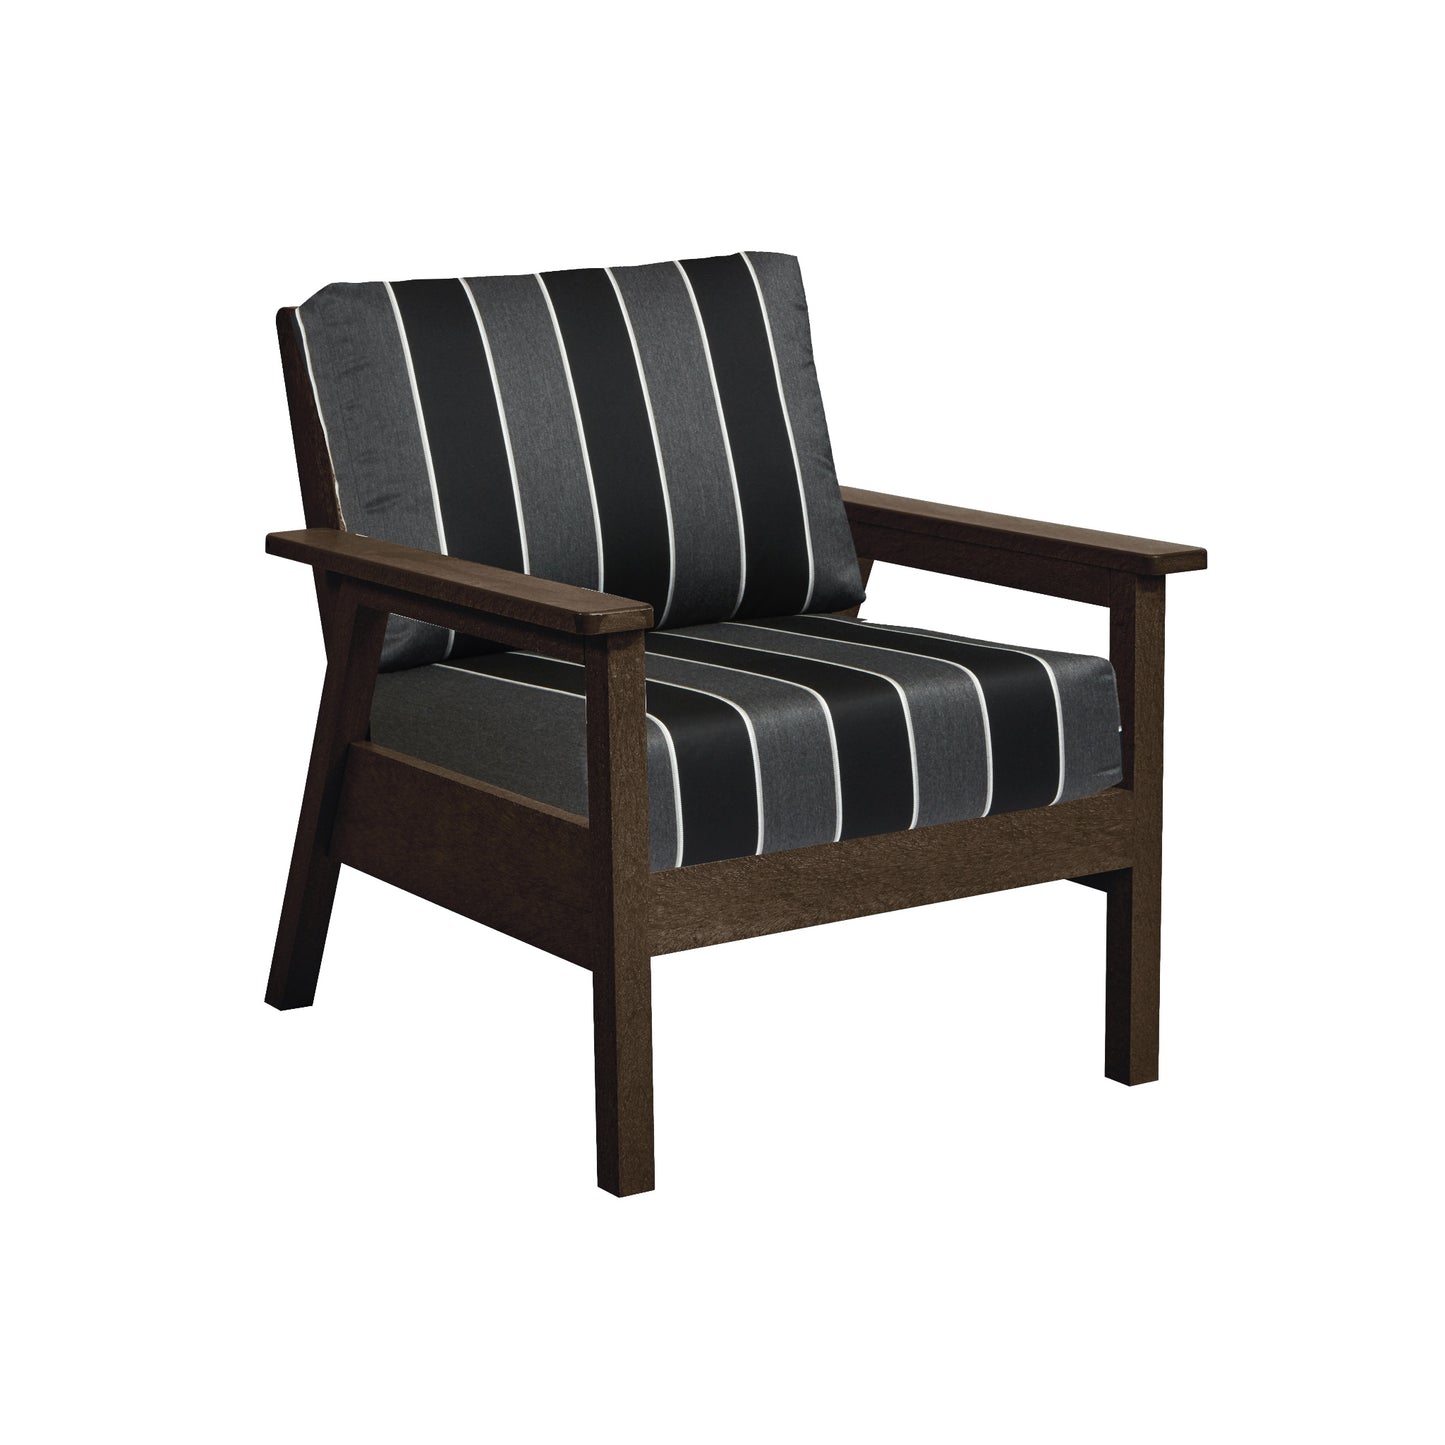 Tofino Chair CHOCOLATE FRAME WITH CUSHIONS - DSF281 [DSF241]